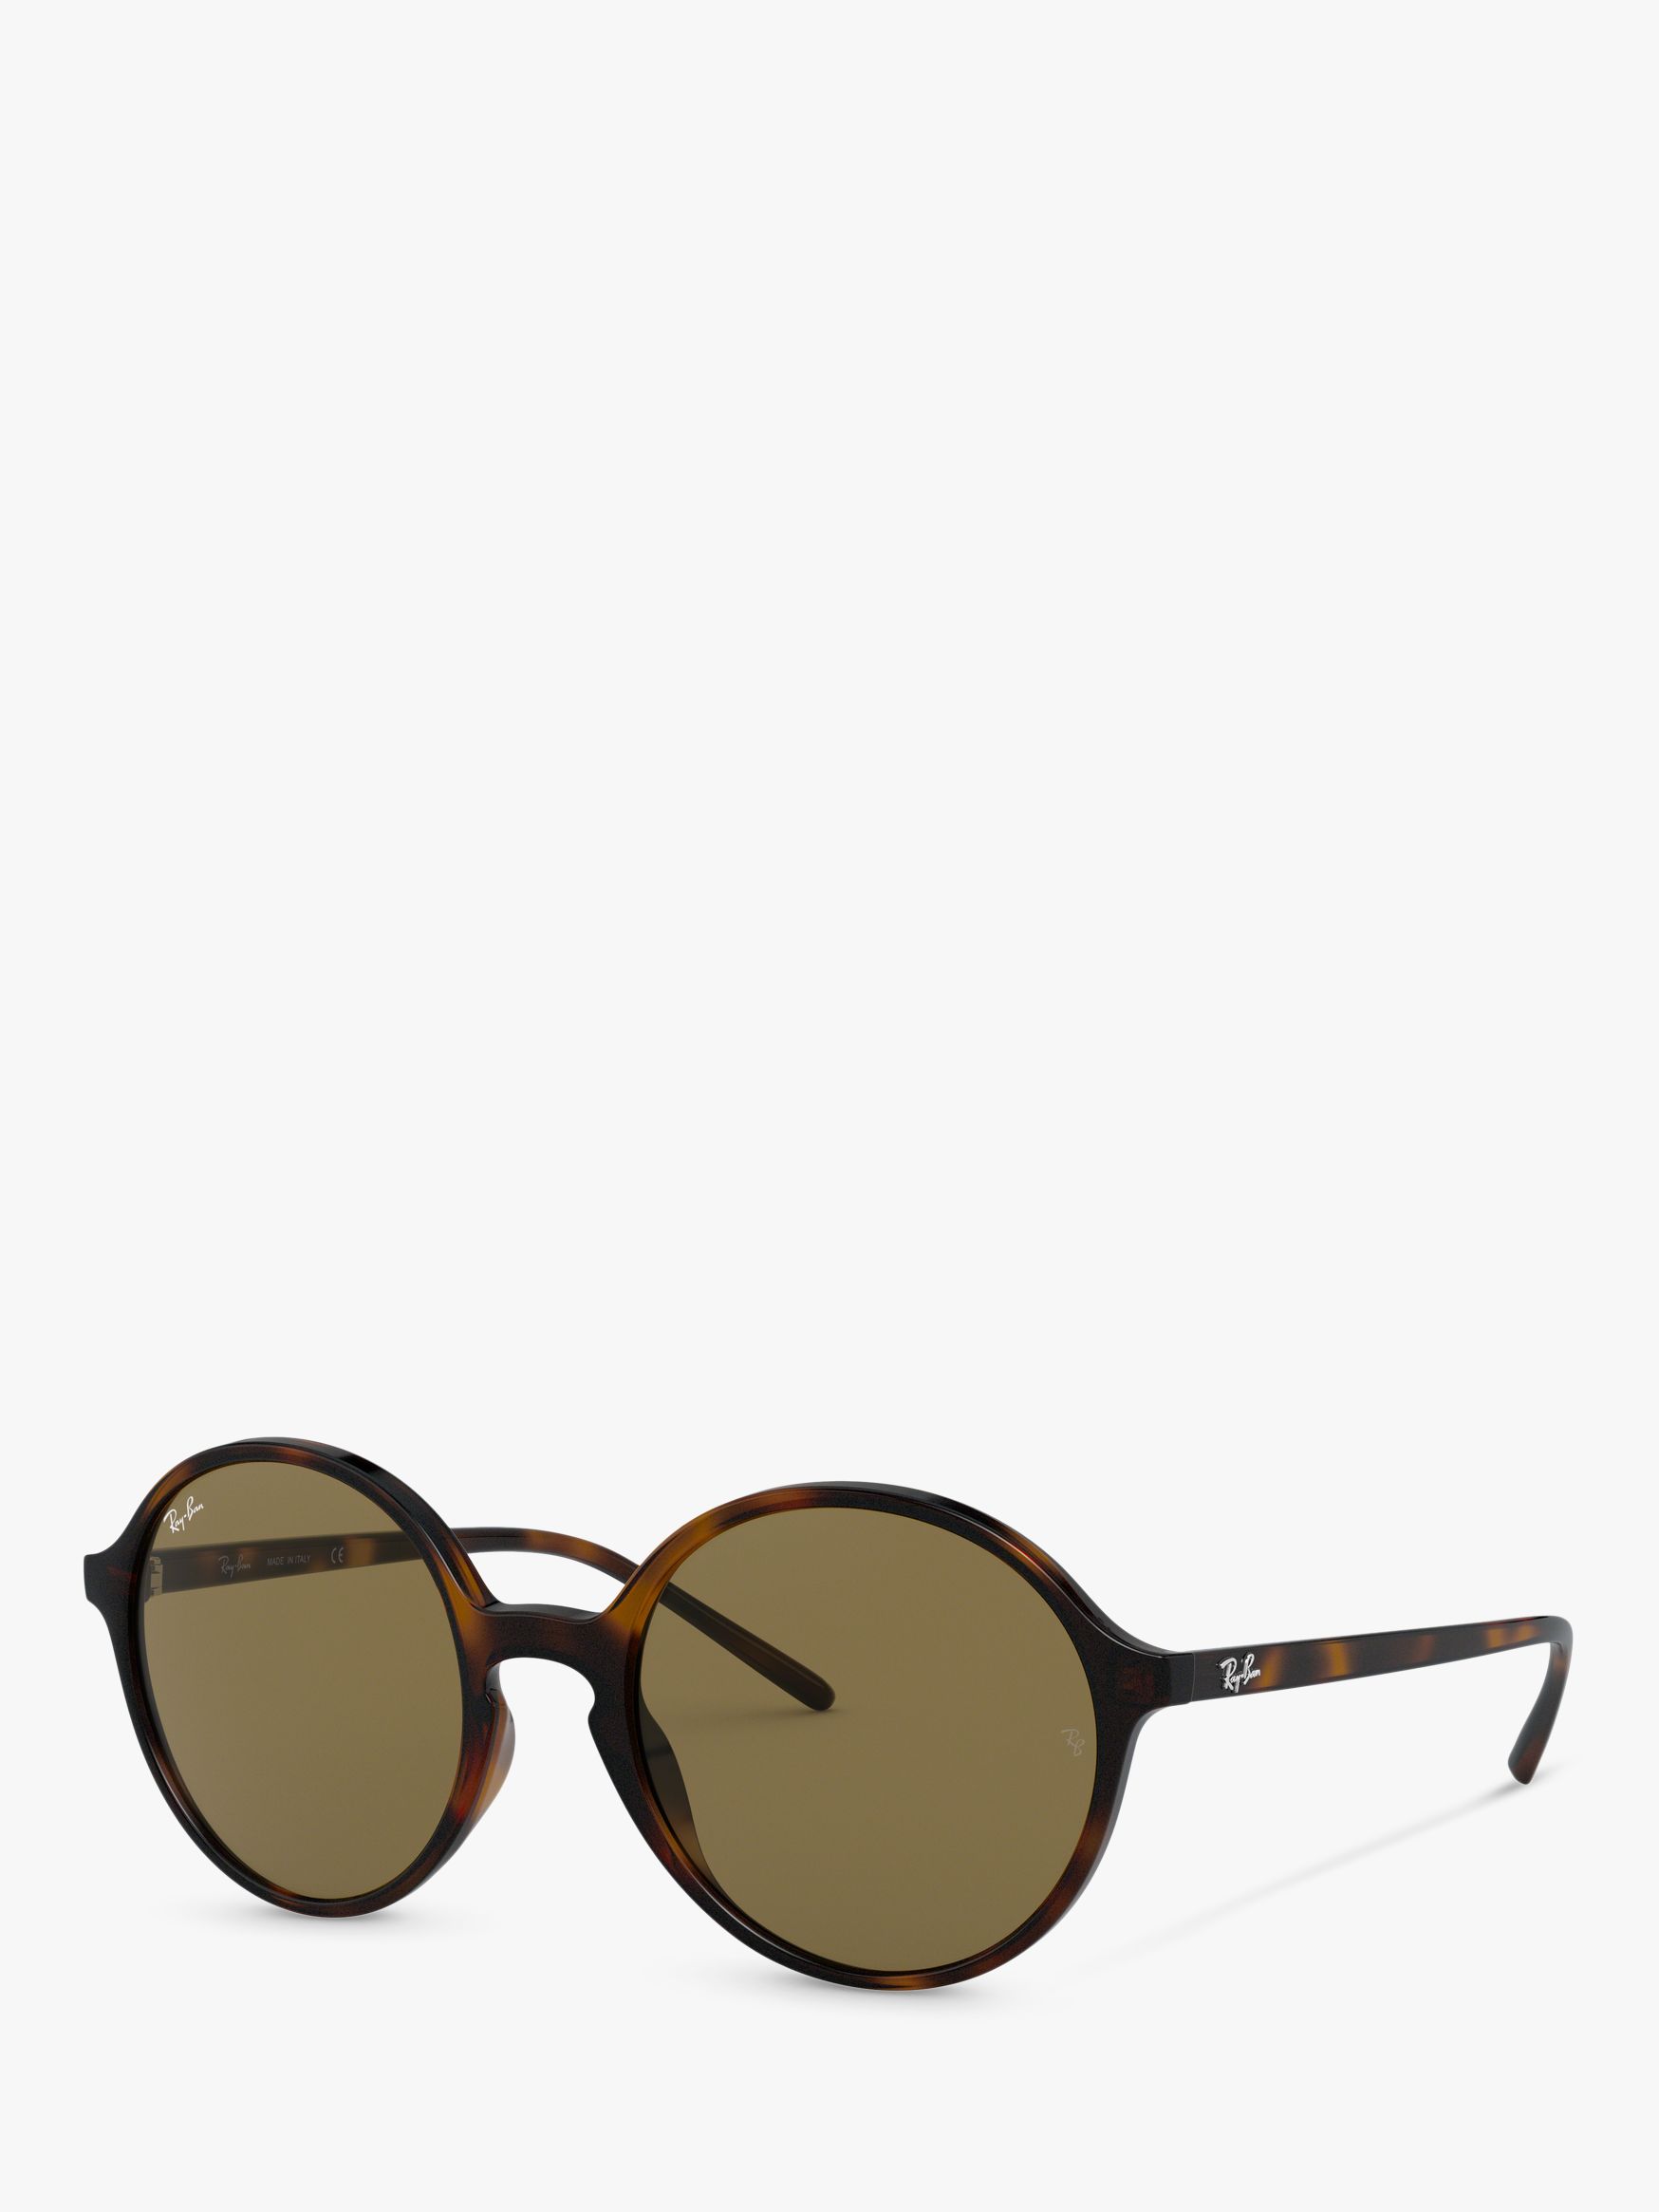 Ray-Ban RB4304 Women's Round Sunglasses, Tortoise/Brown at John Lewis &  Partners